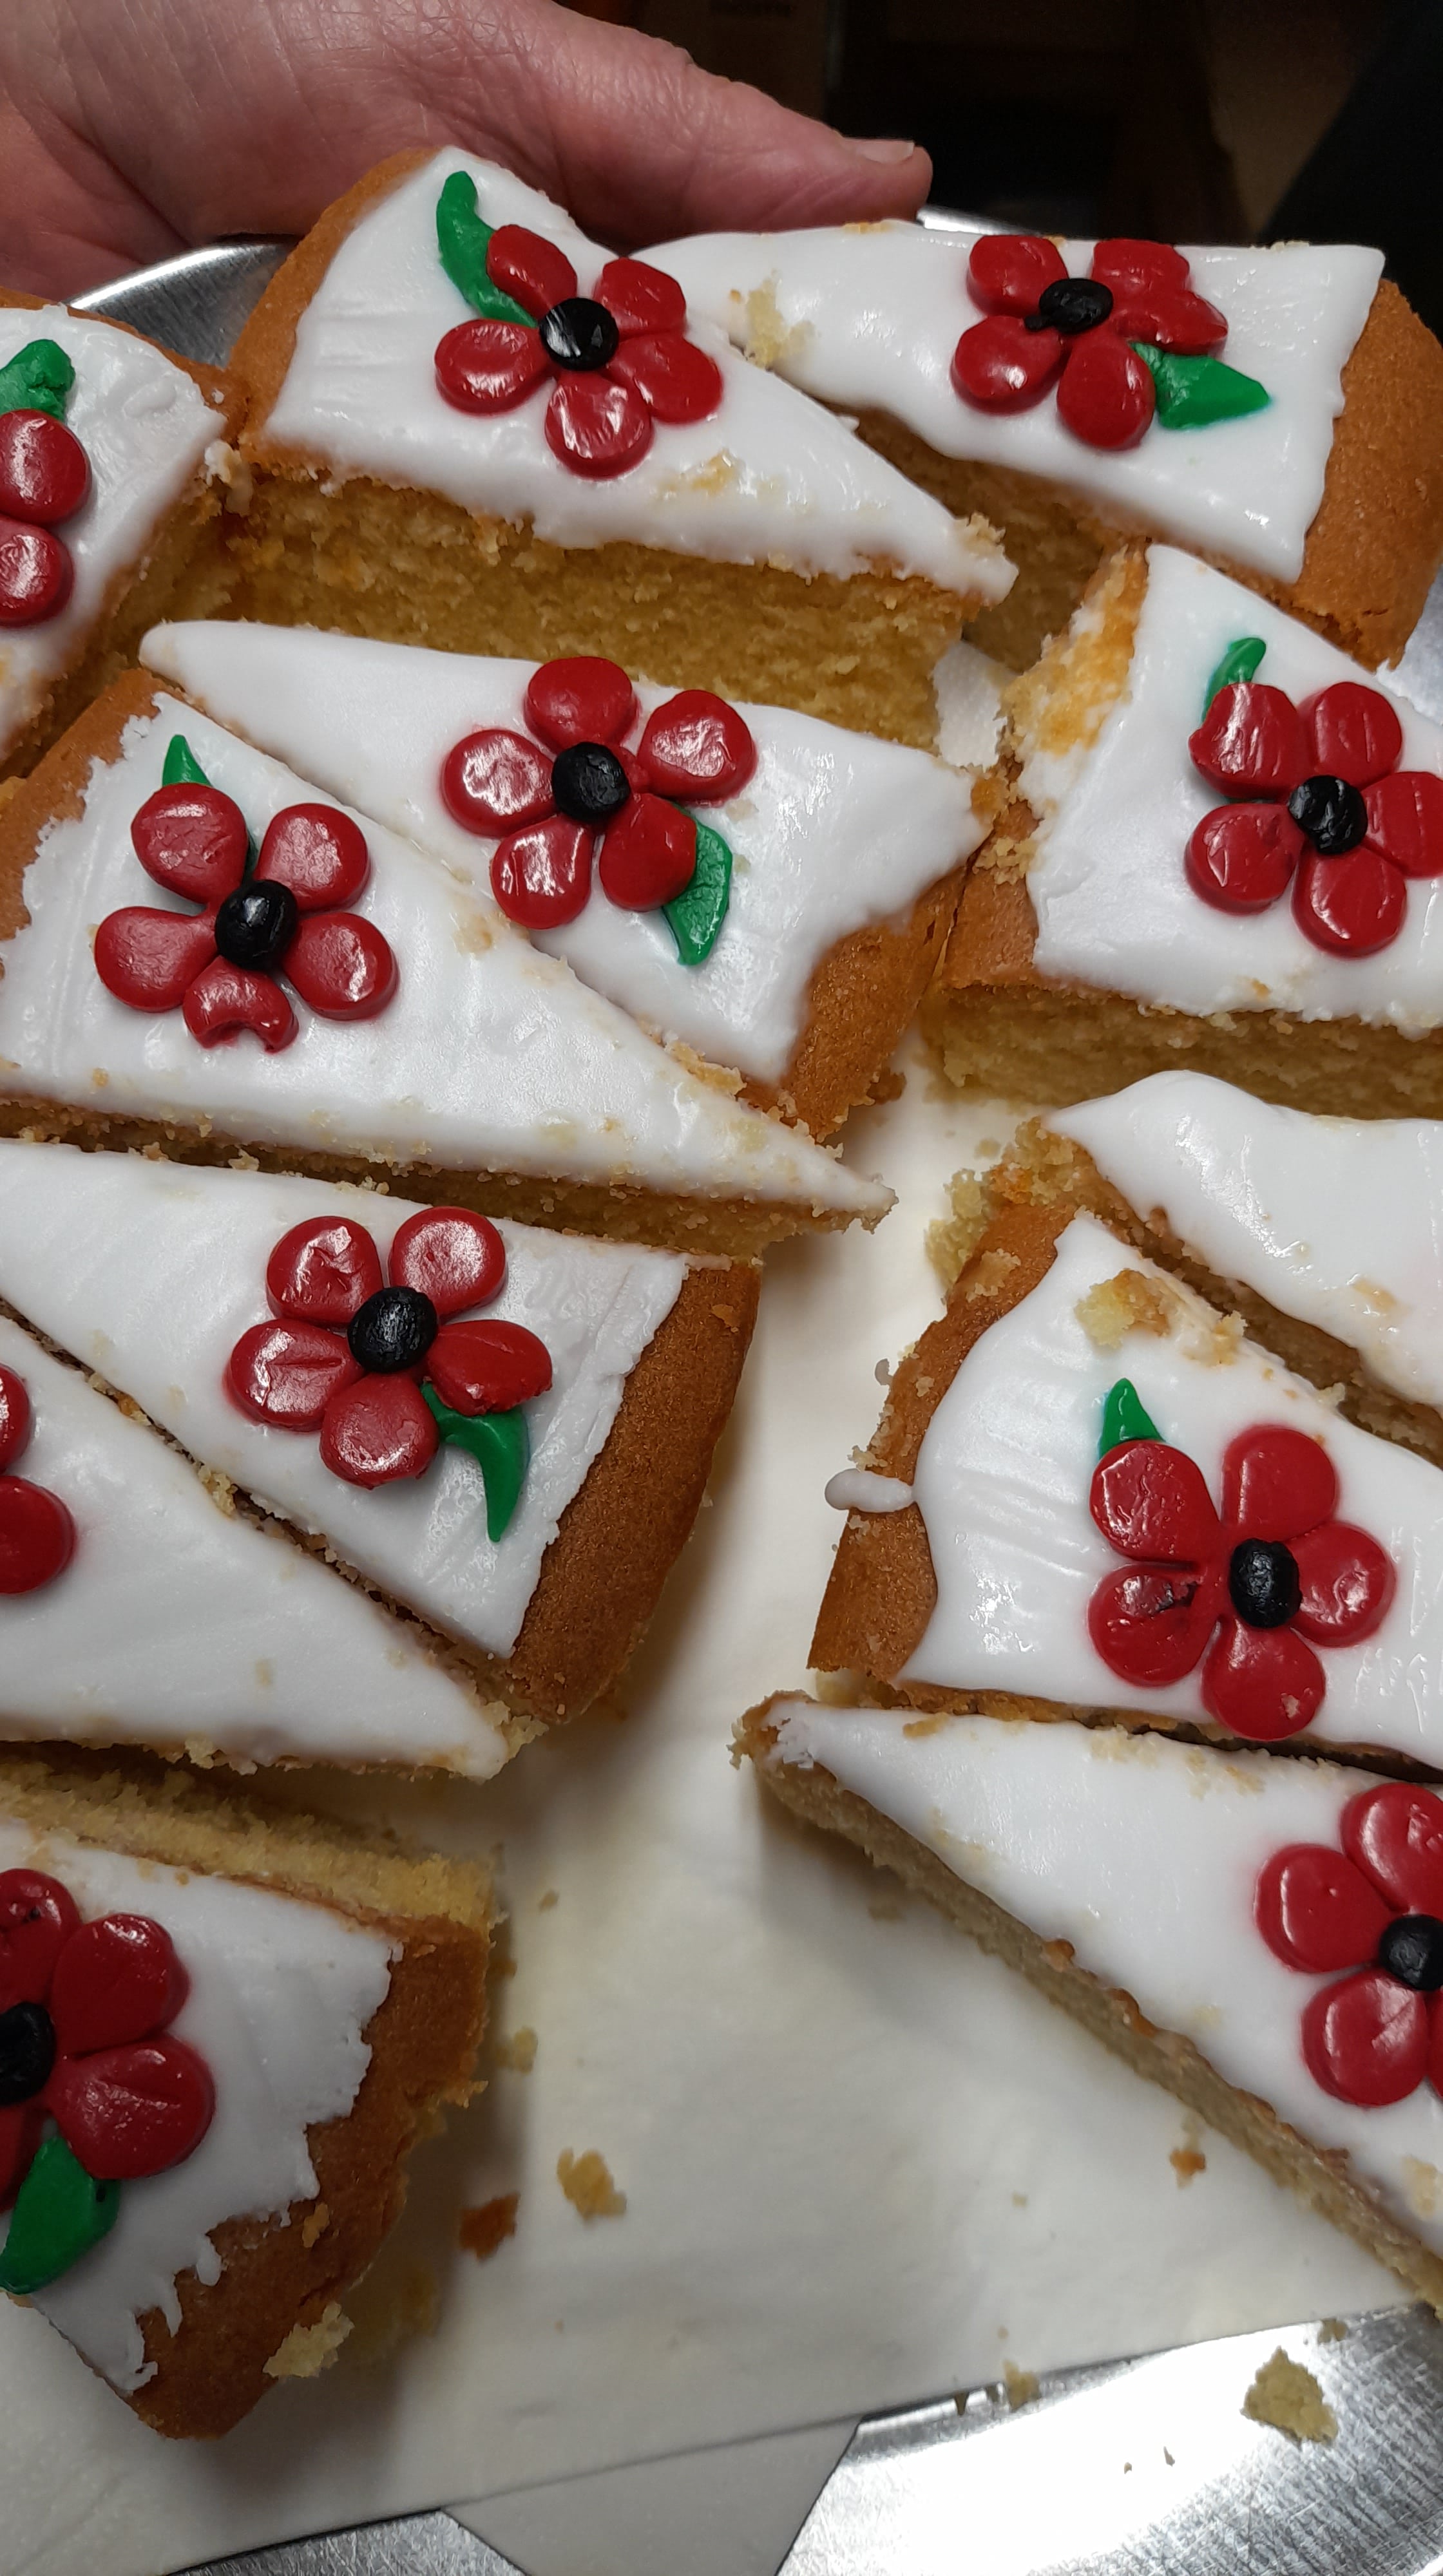 Remembrance Day cakes